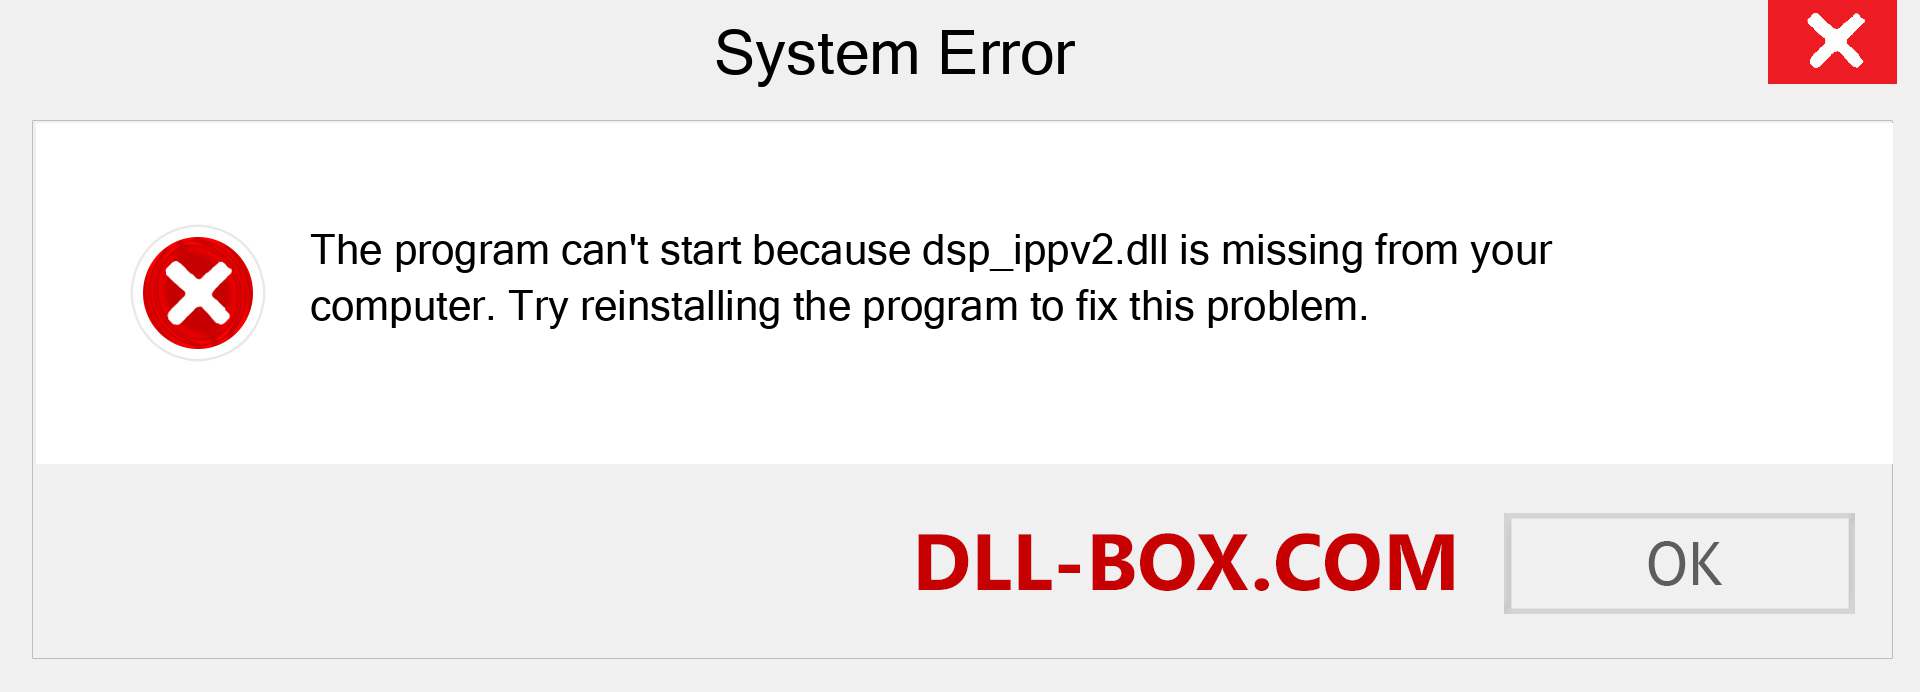  dsp_ippv2.dll file is missing?. Download for Windows 7, 8, 10 - Fix  dsp_ippv2 dll Missing Error on Windows, photos, images